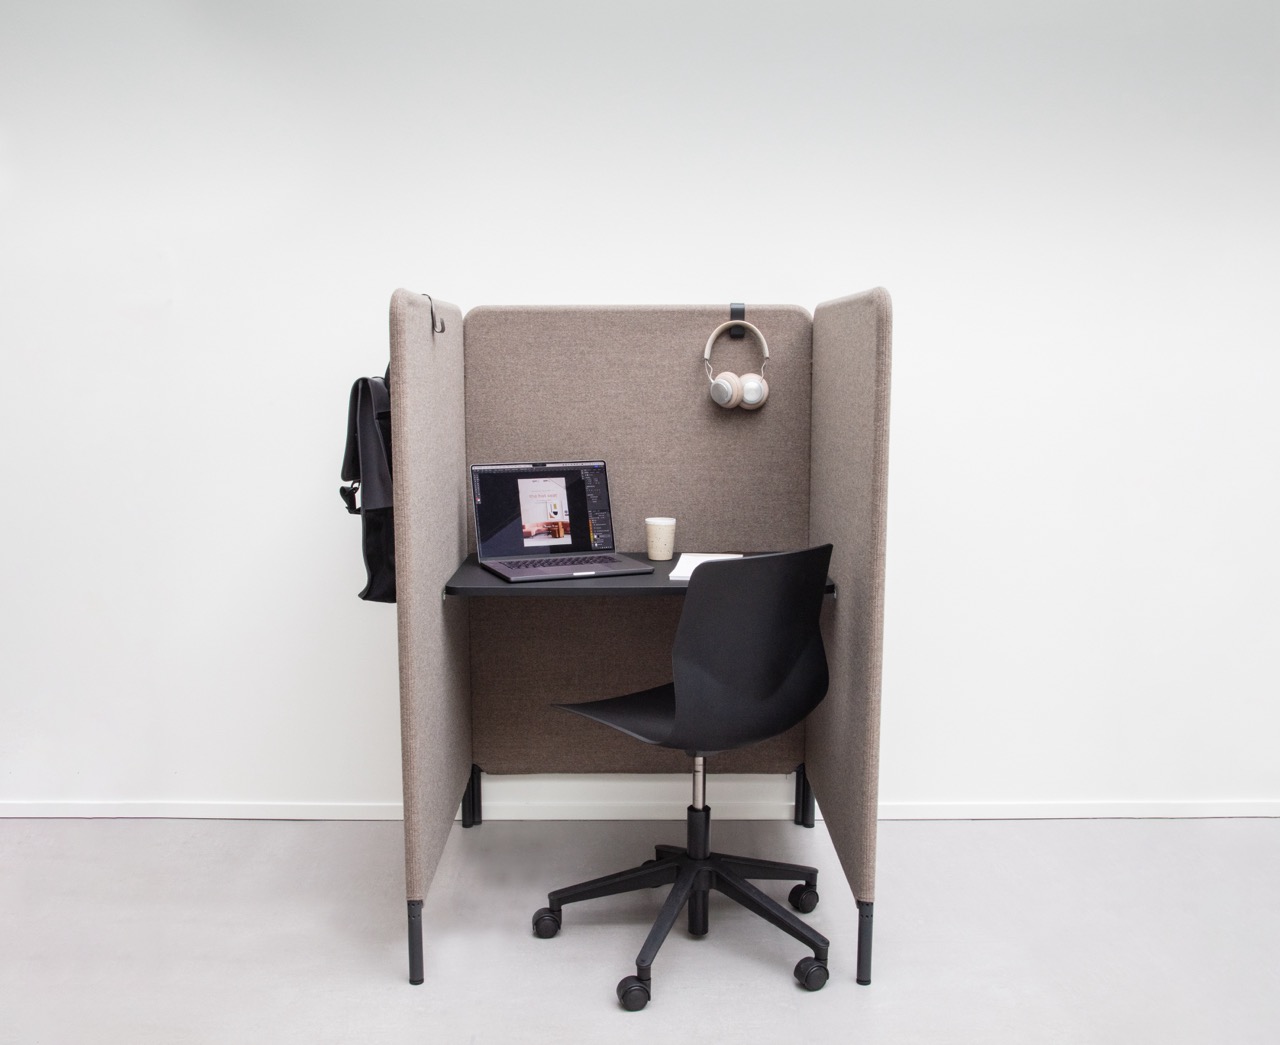 OCEE&FOUR – Work & Study Booths – FourPeople Study Booth – Lifestyle Image 4 Large